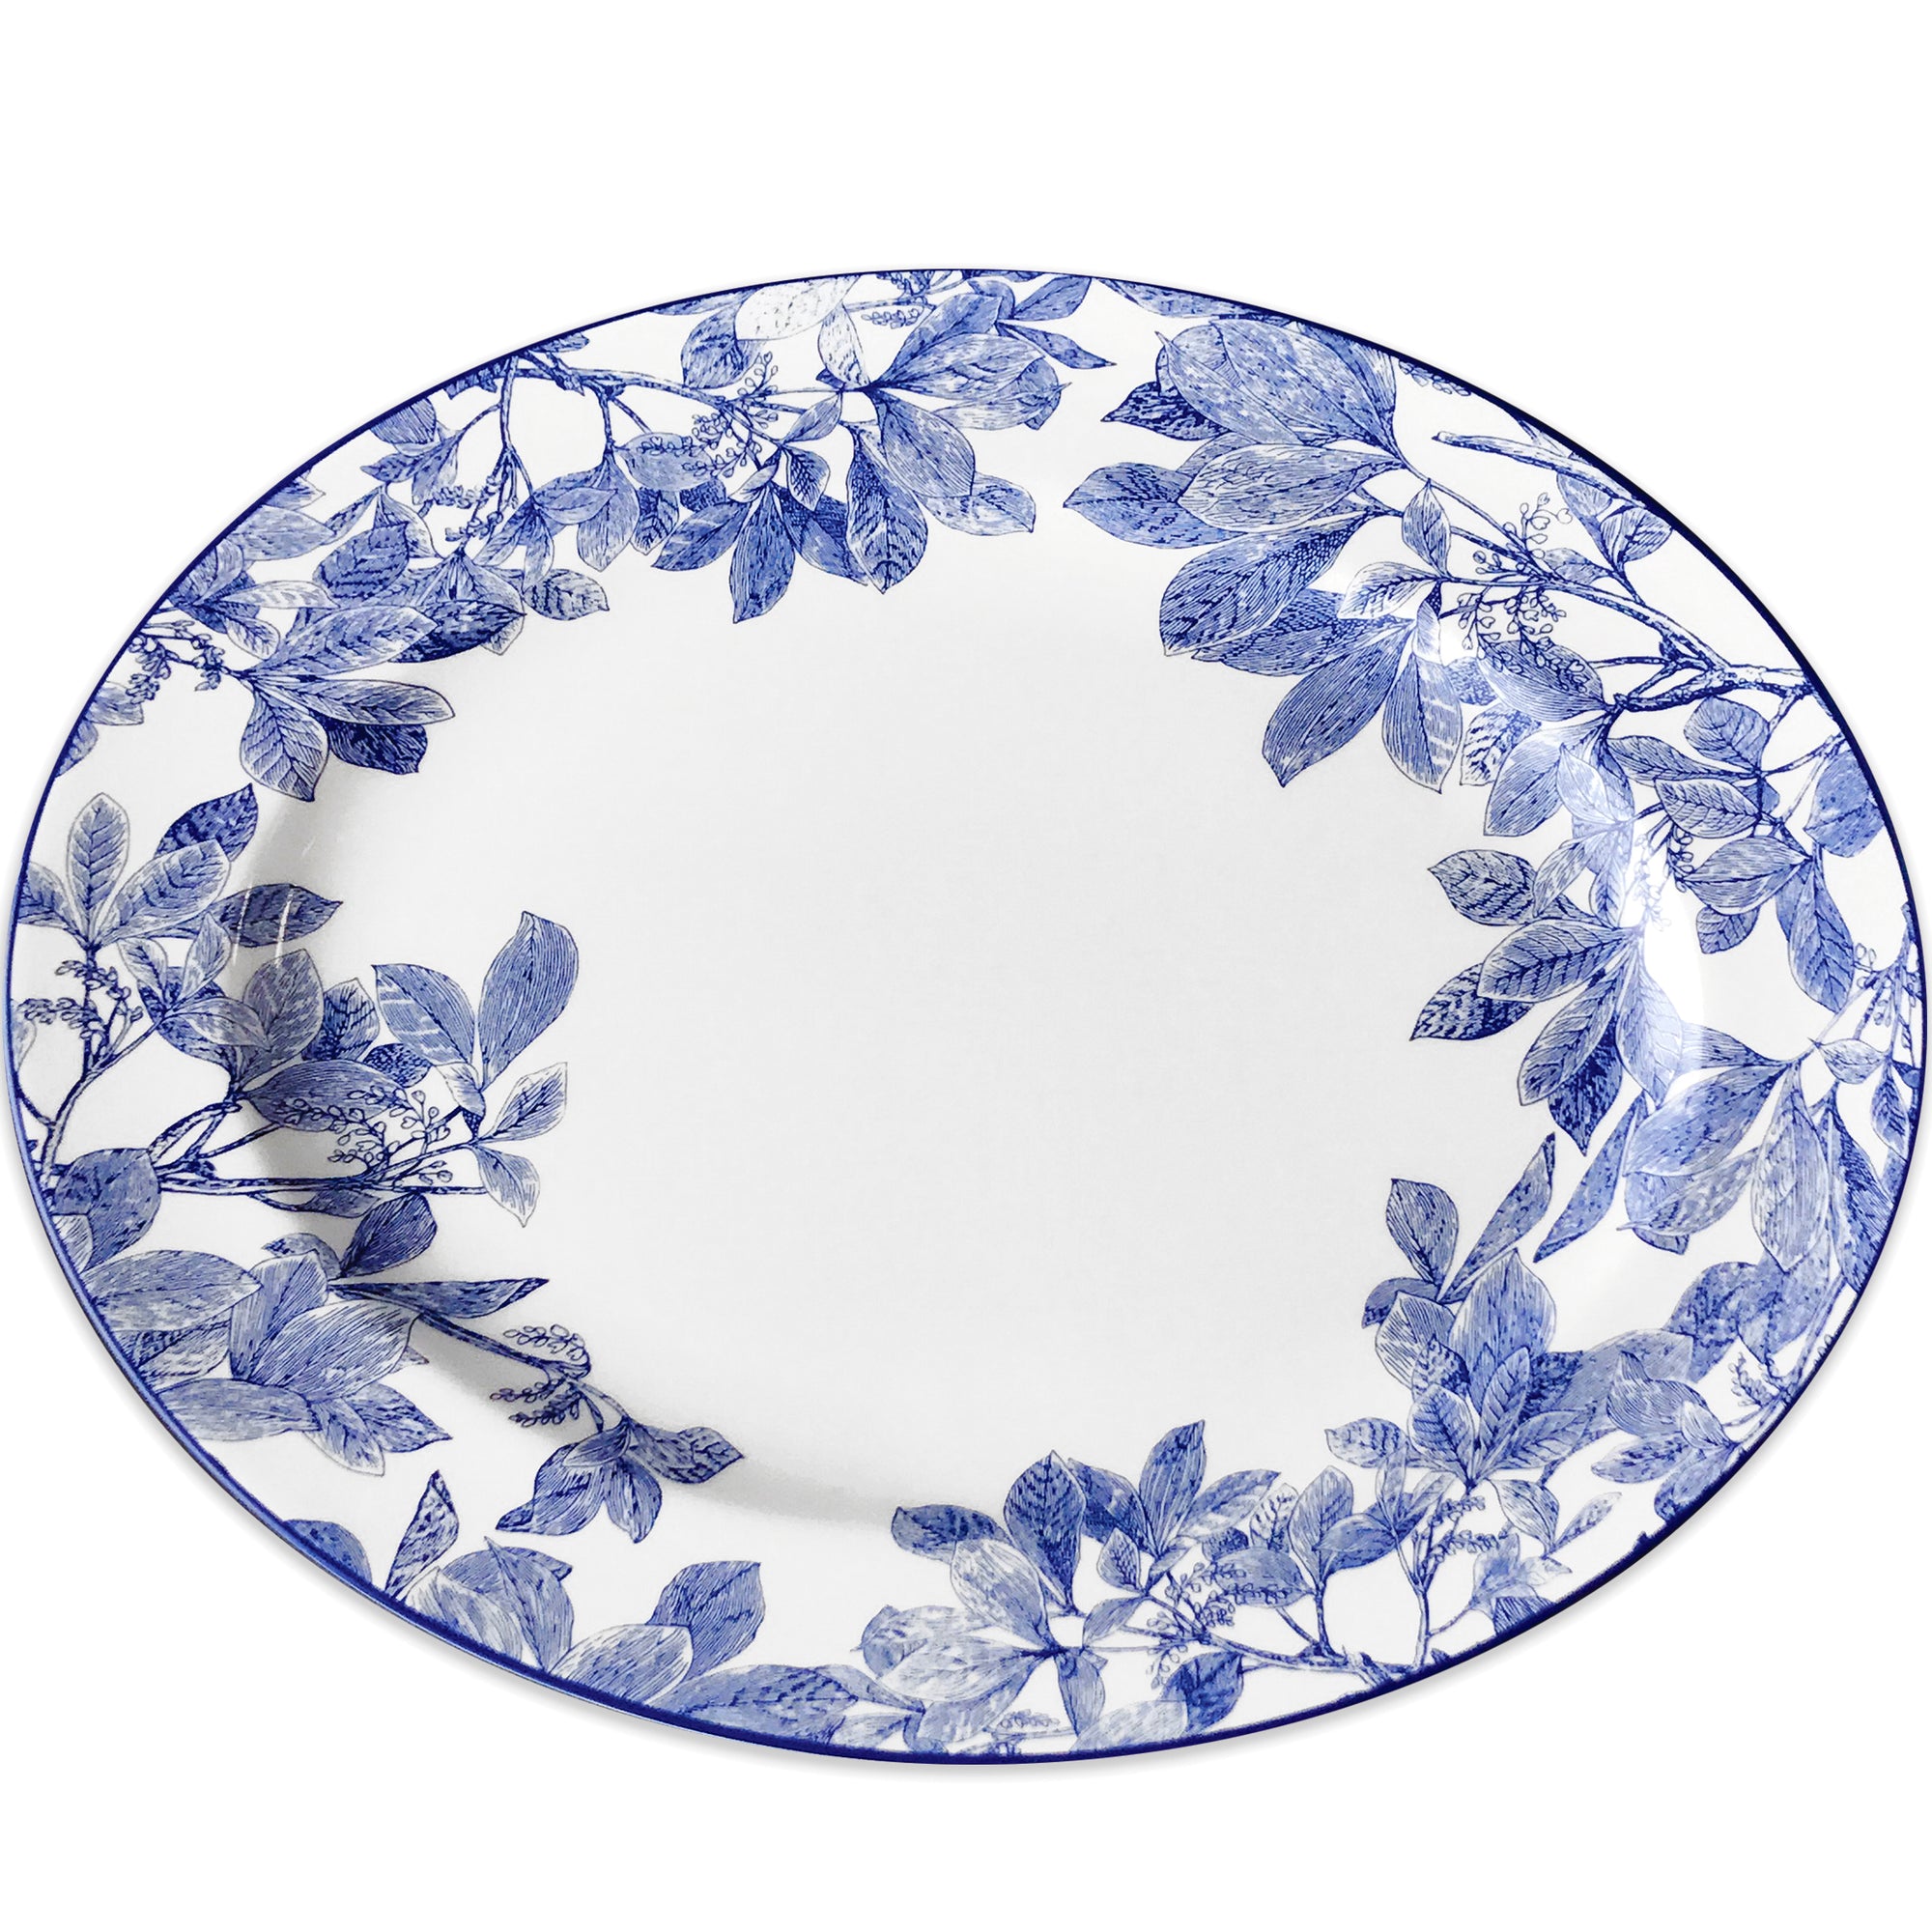 A high-style, white porcelain platter with a blue floral pattern around the rim, the Arbor Oval Rimmed Platter by Caskata Artisanal Home.